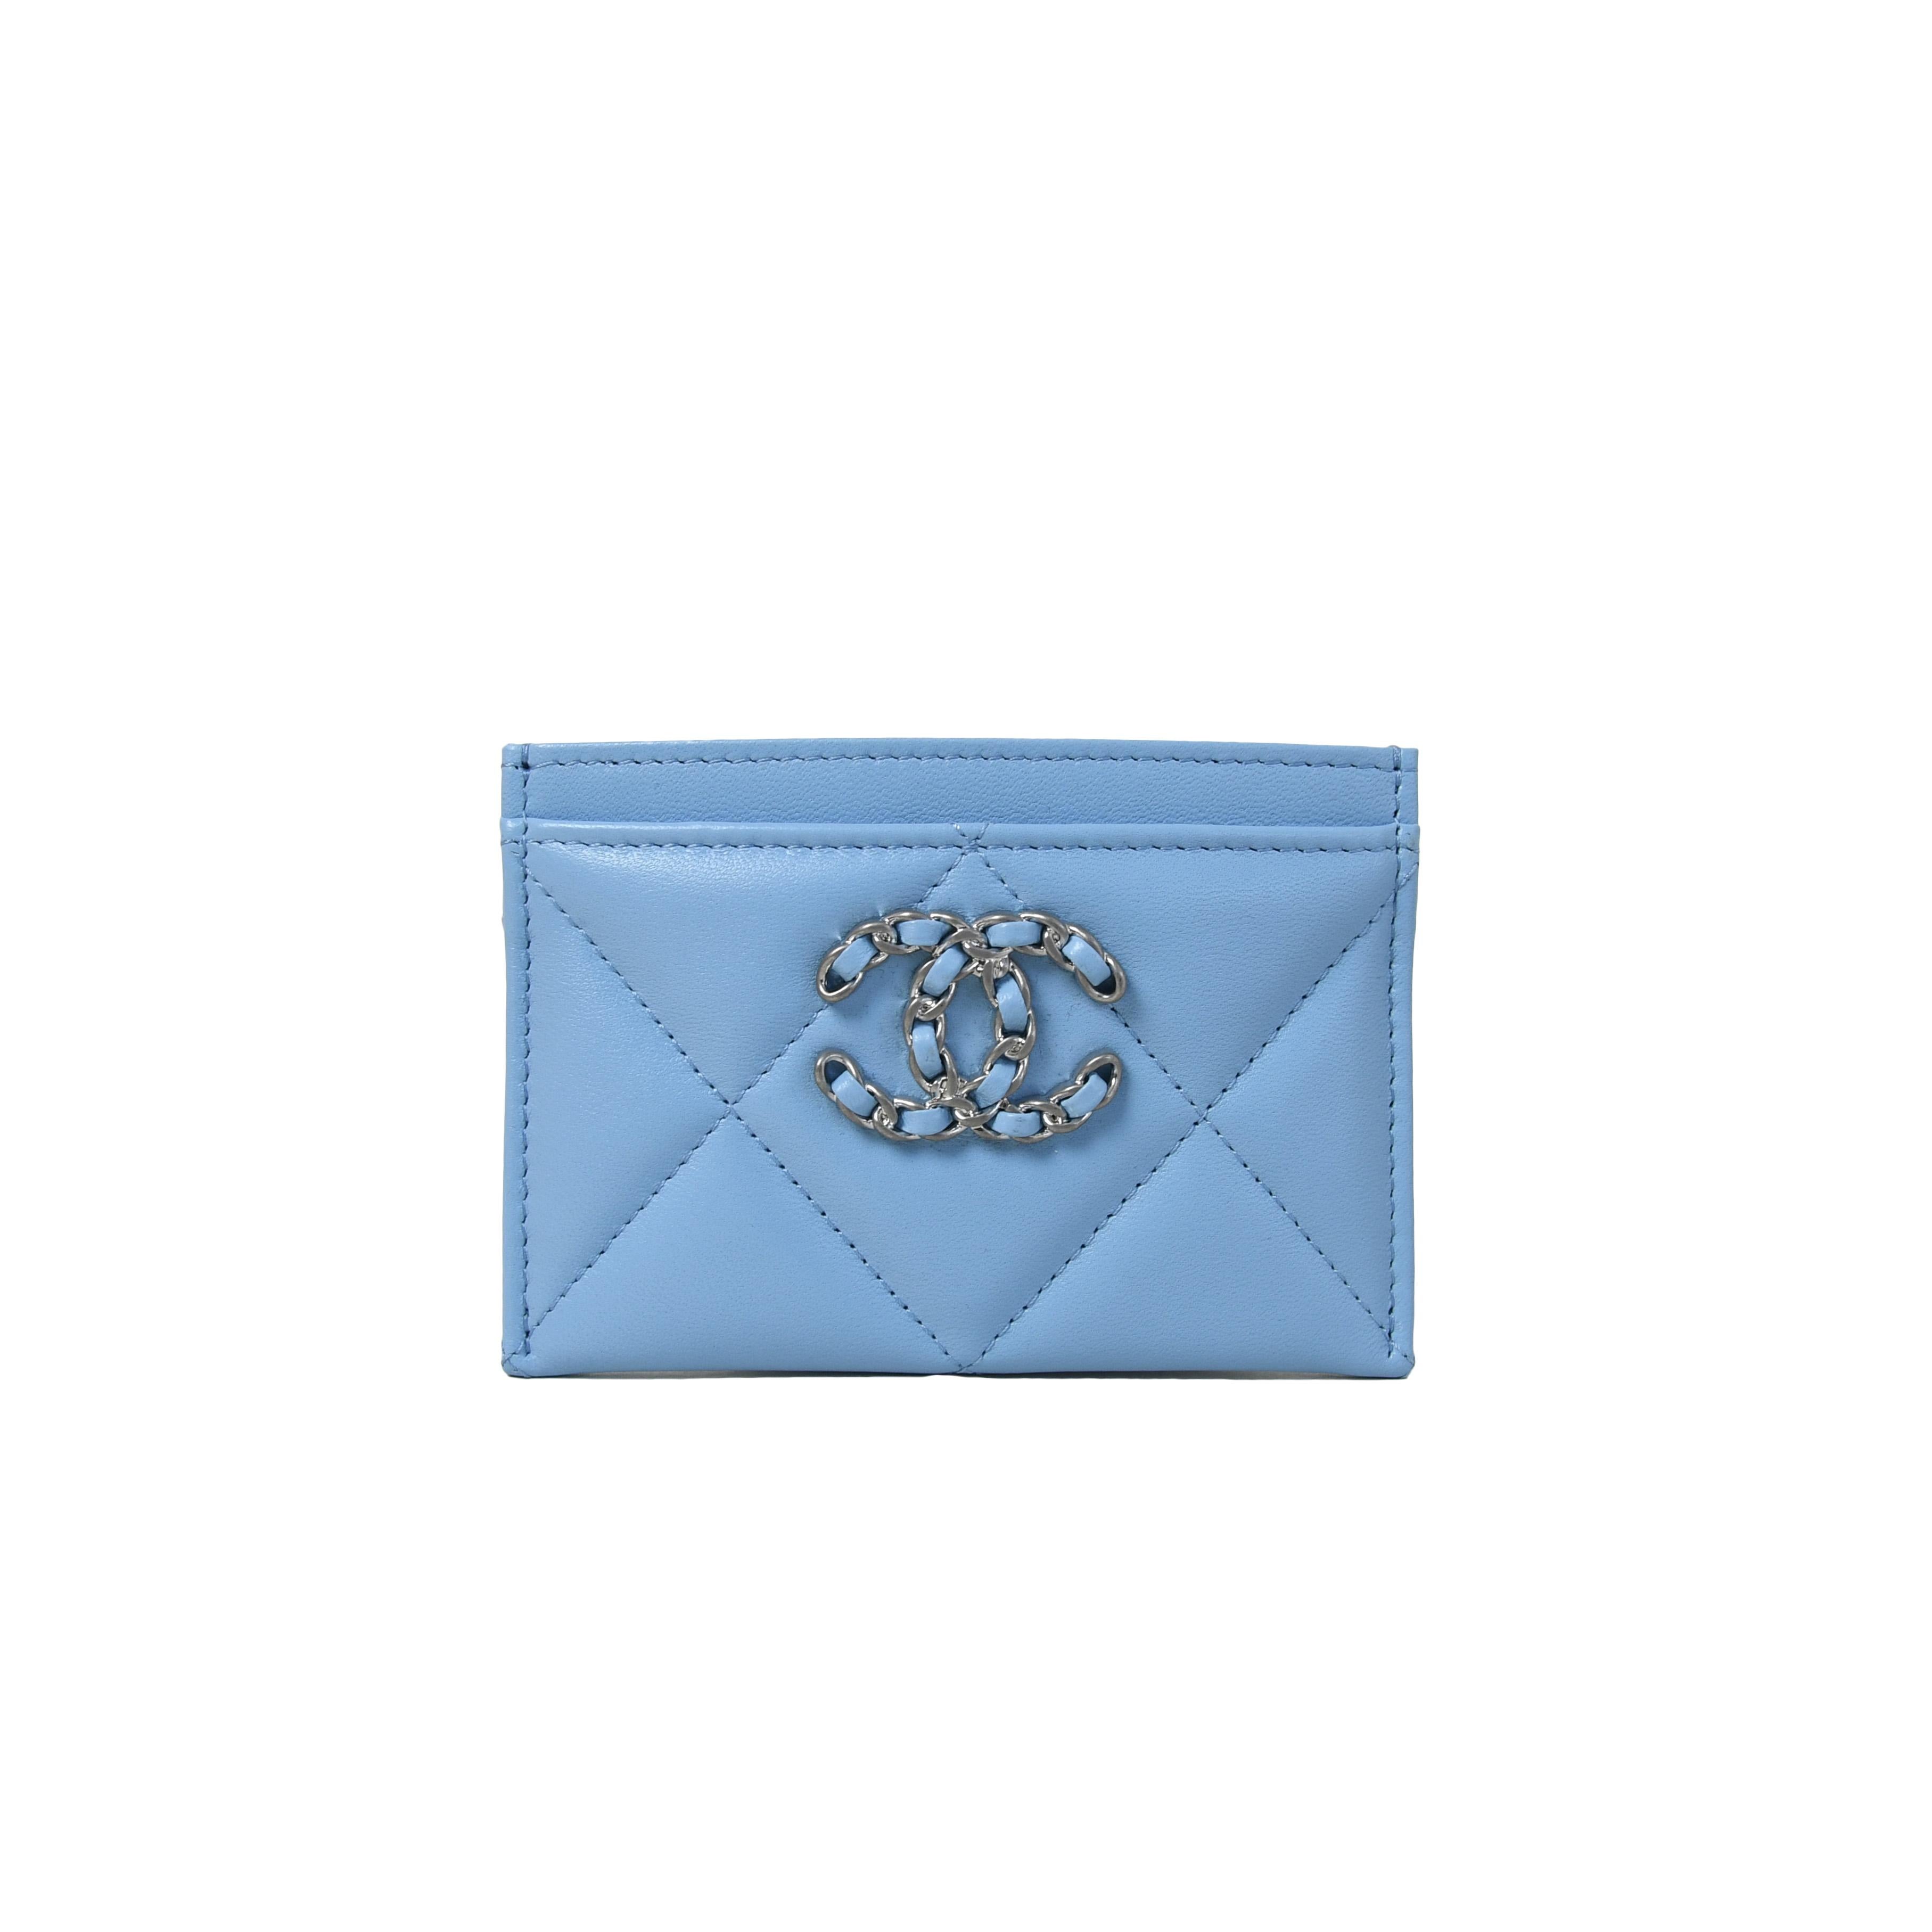 Chanel Boy 19 Card Holder Sky Blue

Condition:
Brand New, Never Worn.
This item comes with all the accessories.